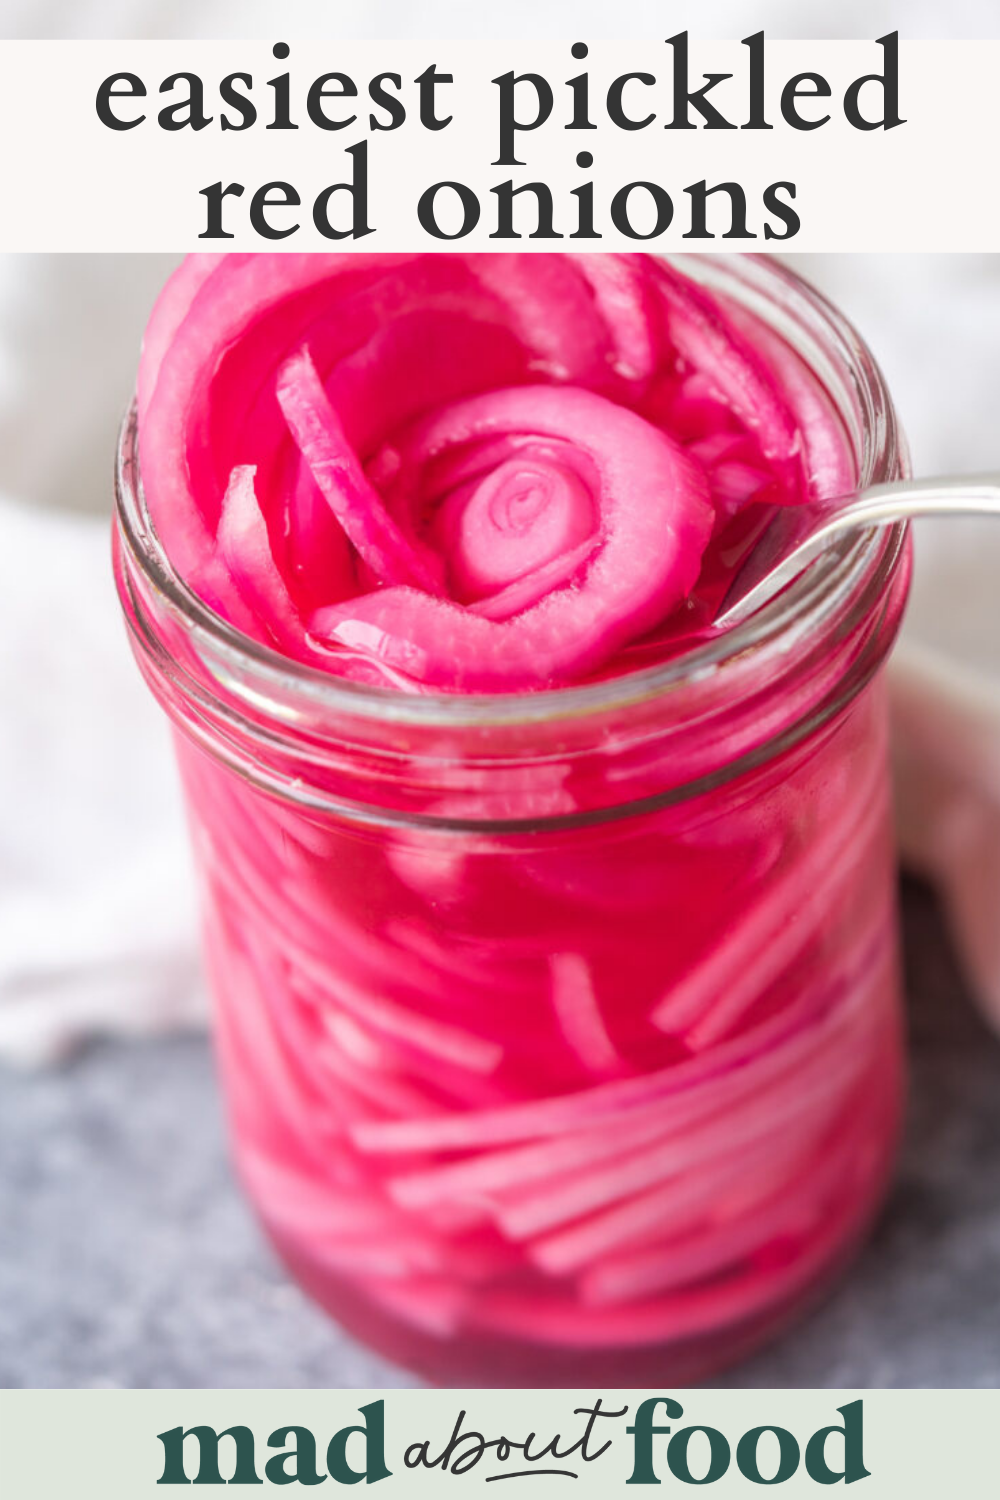 Image for pinning Easiest Pickled Red Onions recipe on pinterest